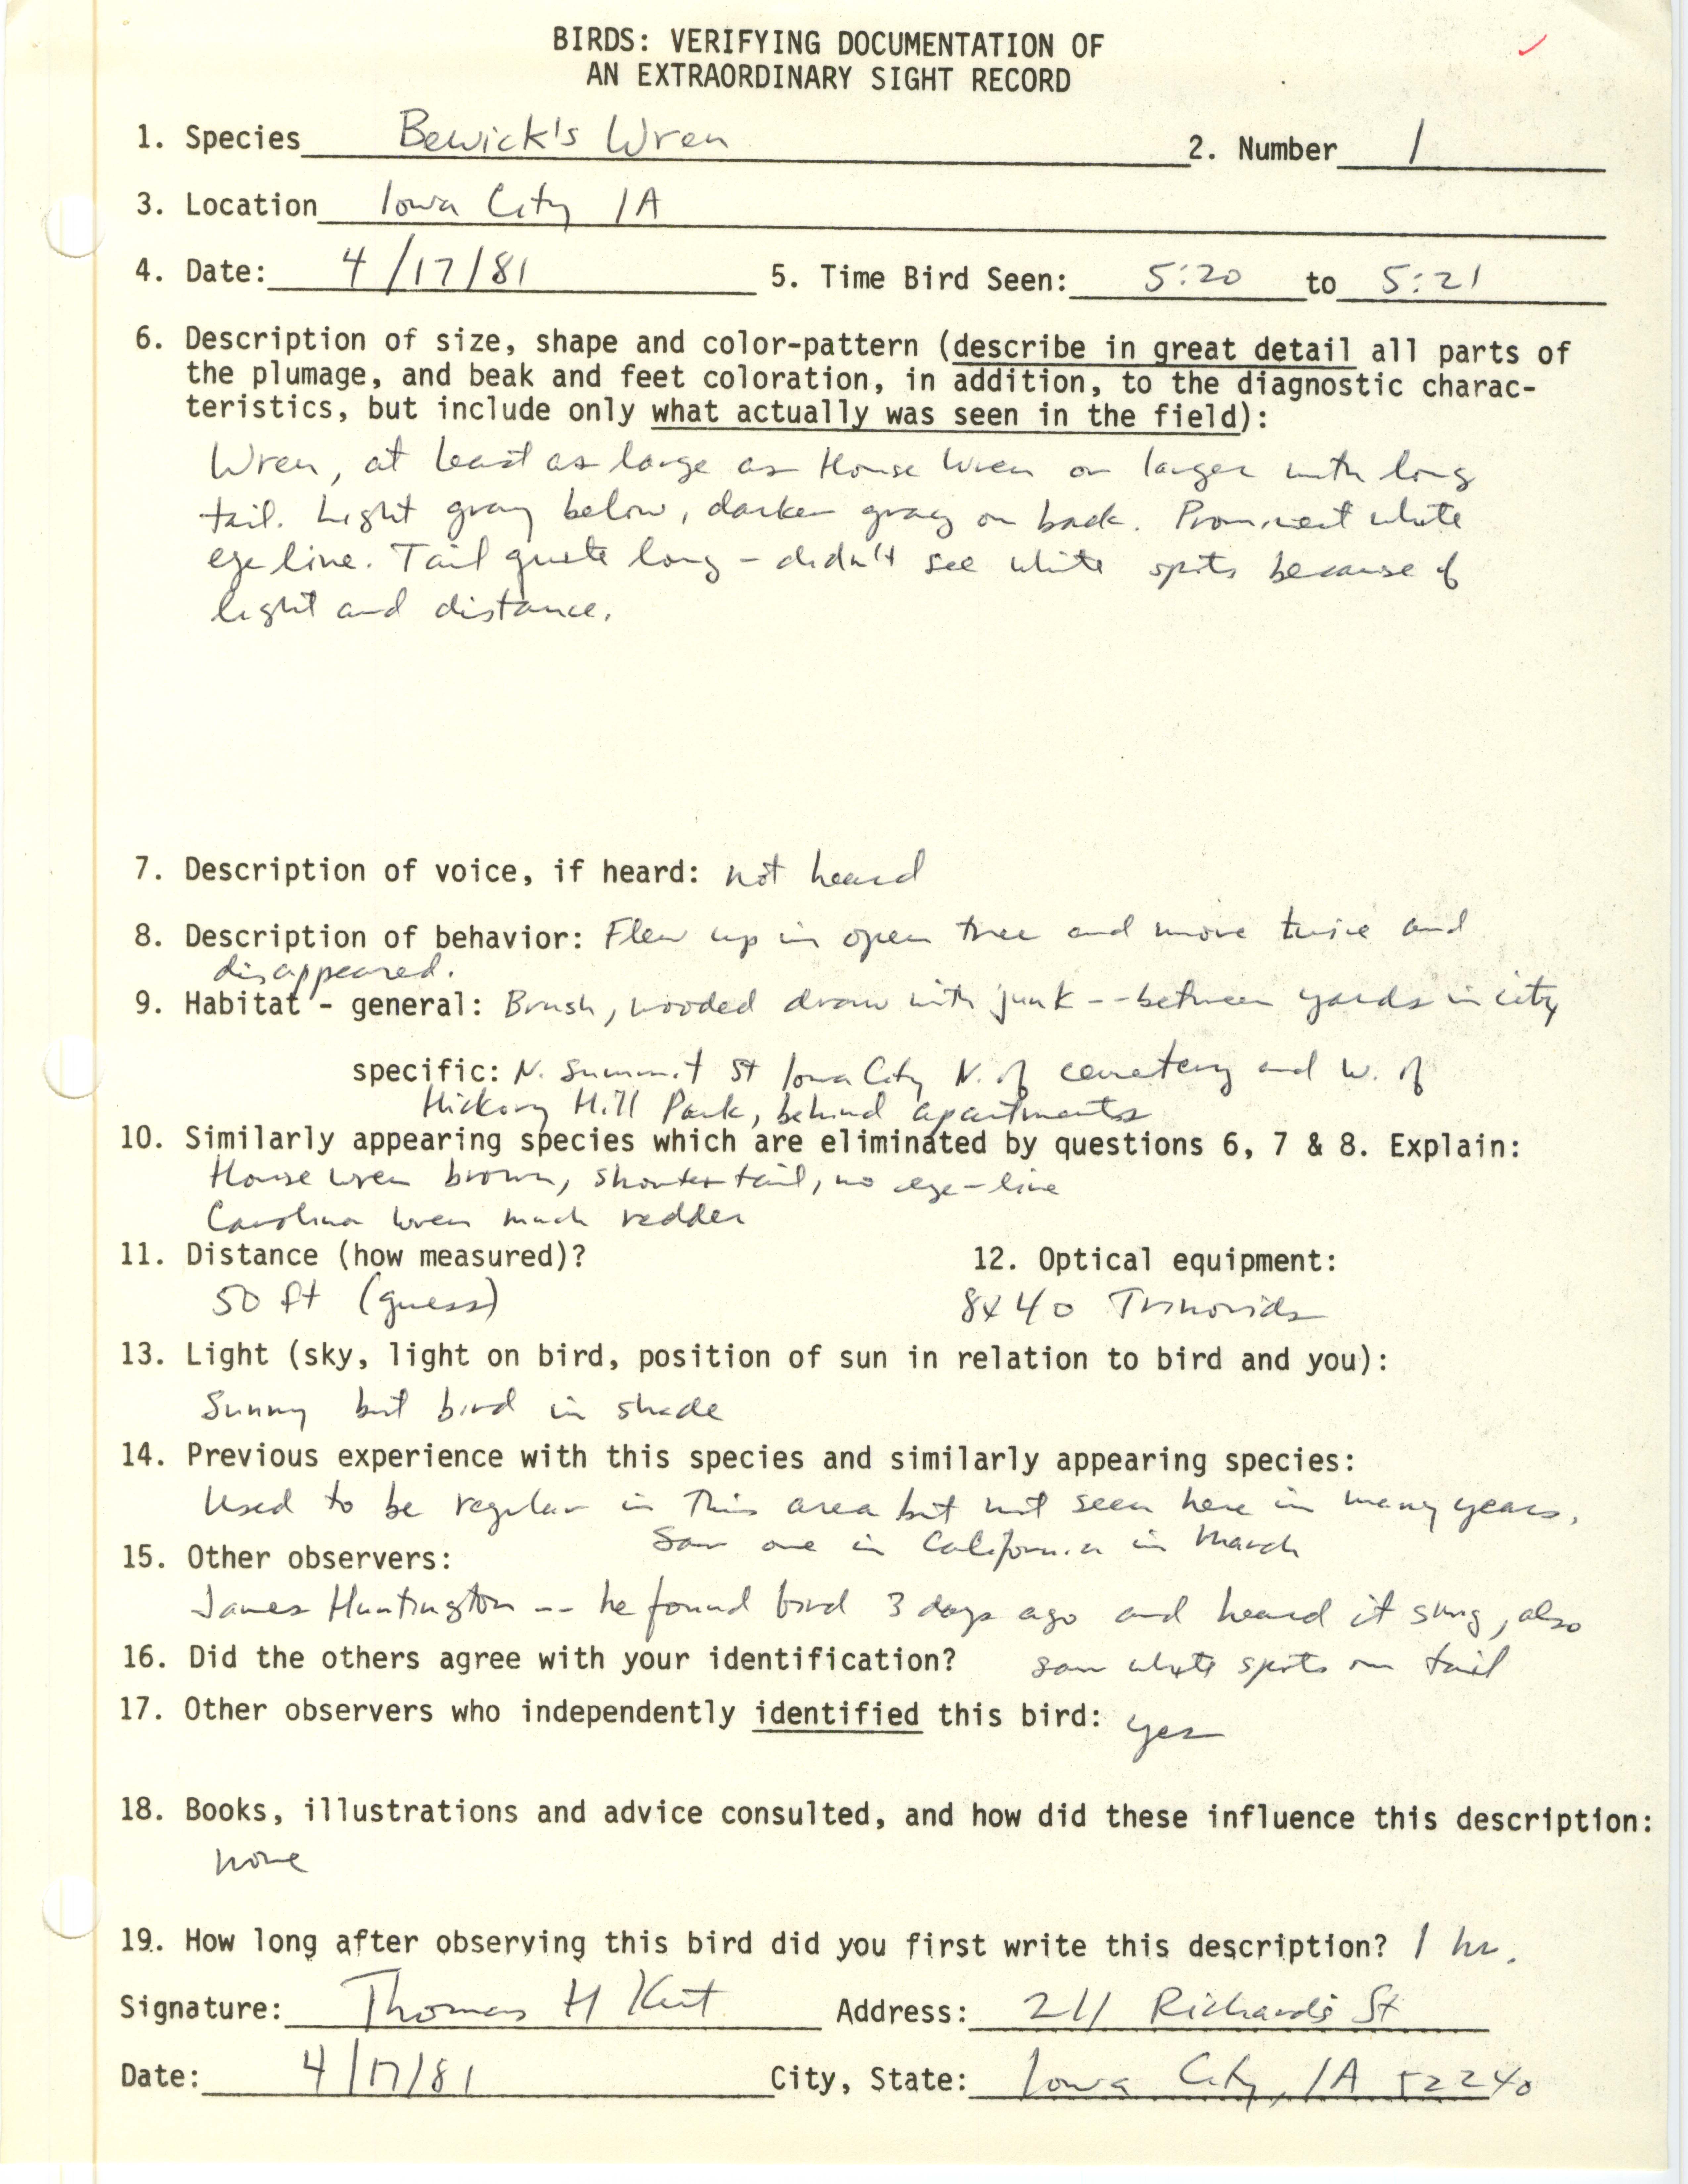 Birds: verifying documentation of an extraordinary sight record submitted by Thomas H. Kent, April 17 1981